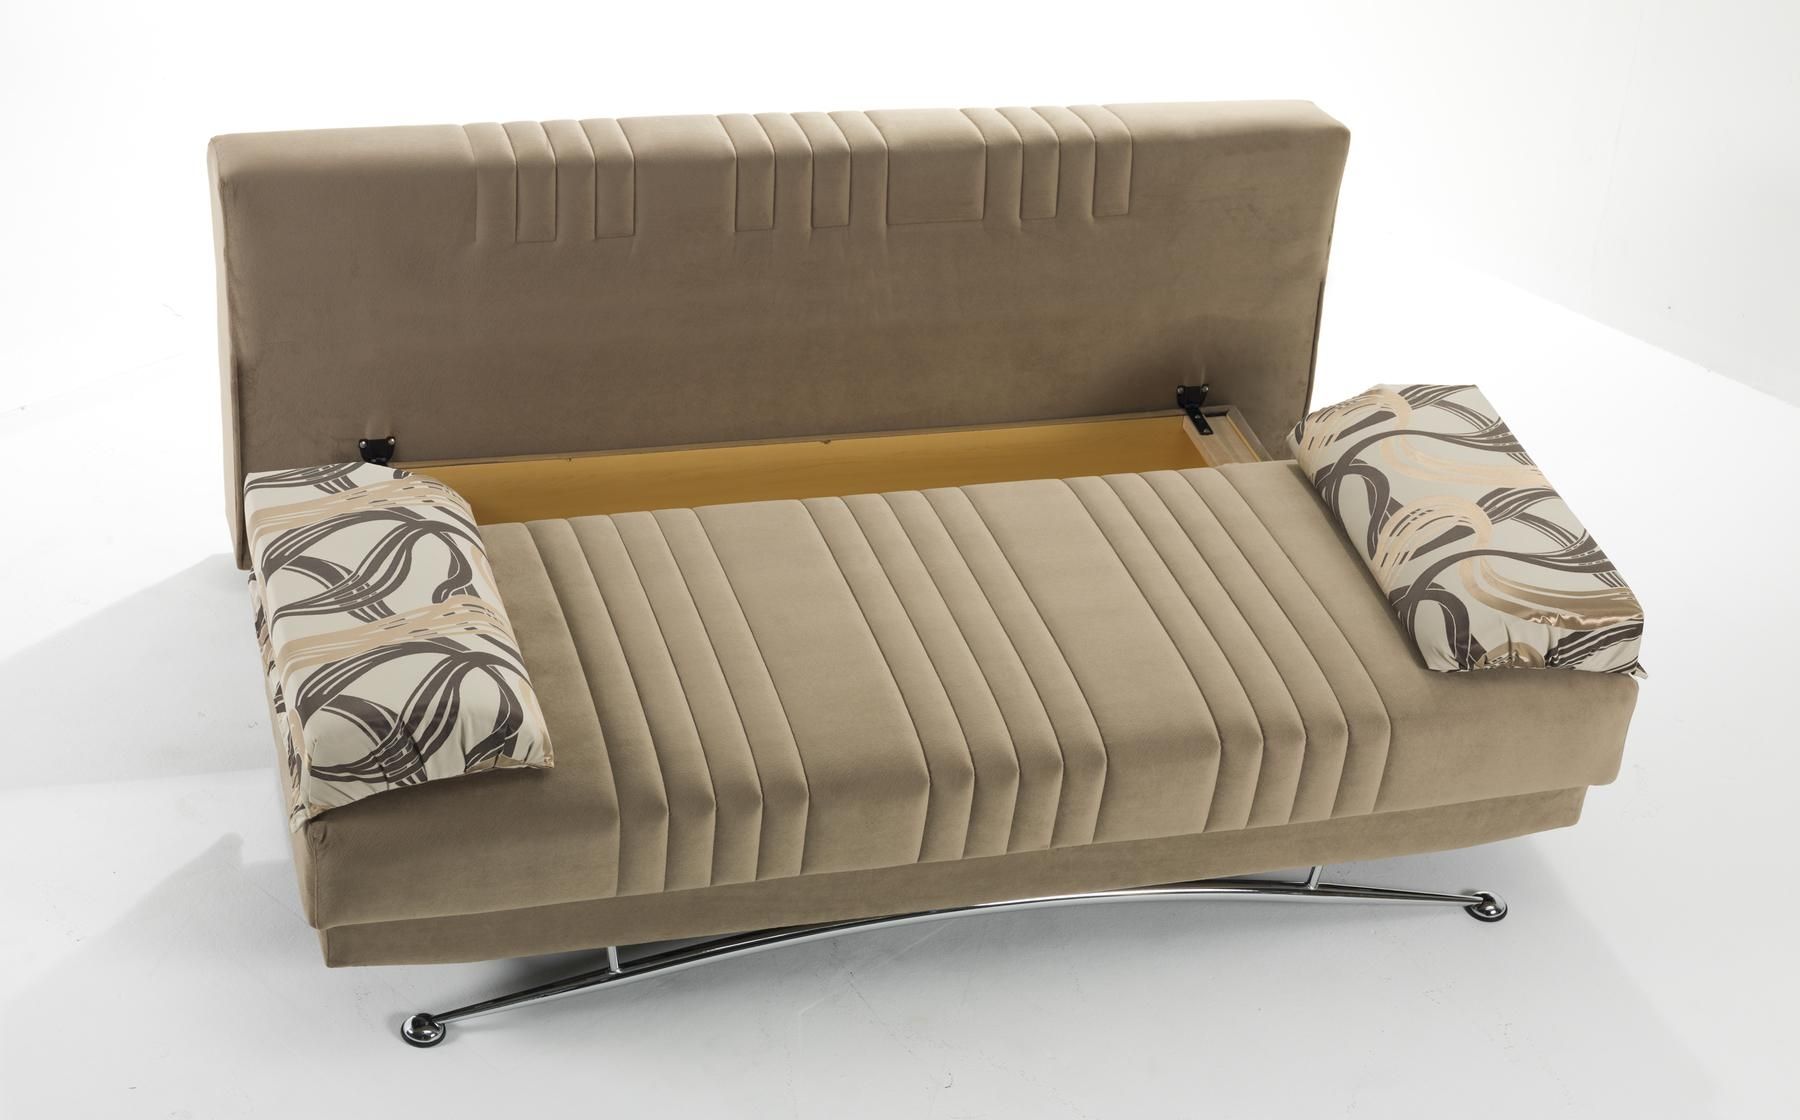 Sofas Center : Best Sofads For Everyday Use Ukbest Support Board Throughout Sofa Beds With Support Boards (View 12 of 20)